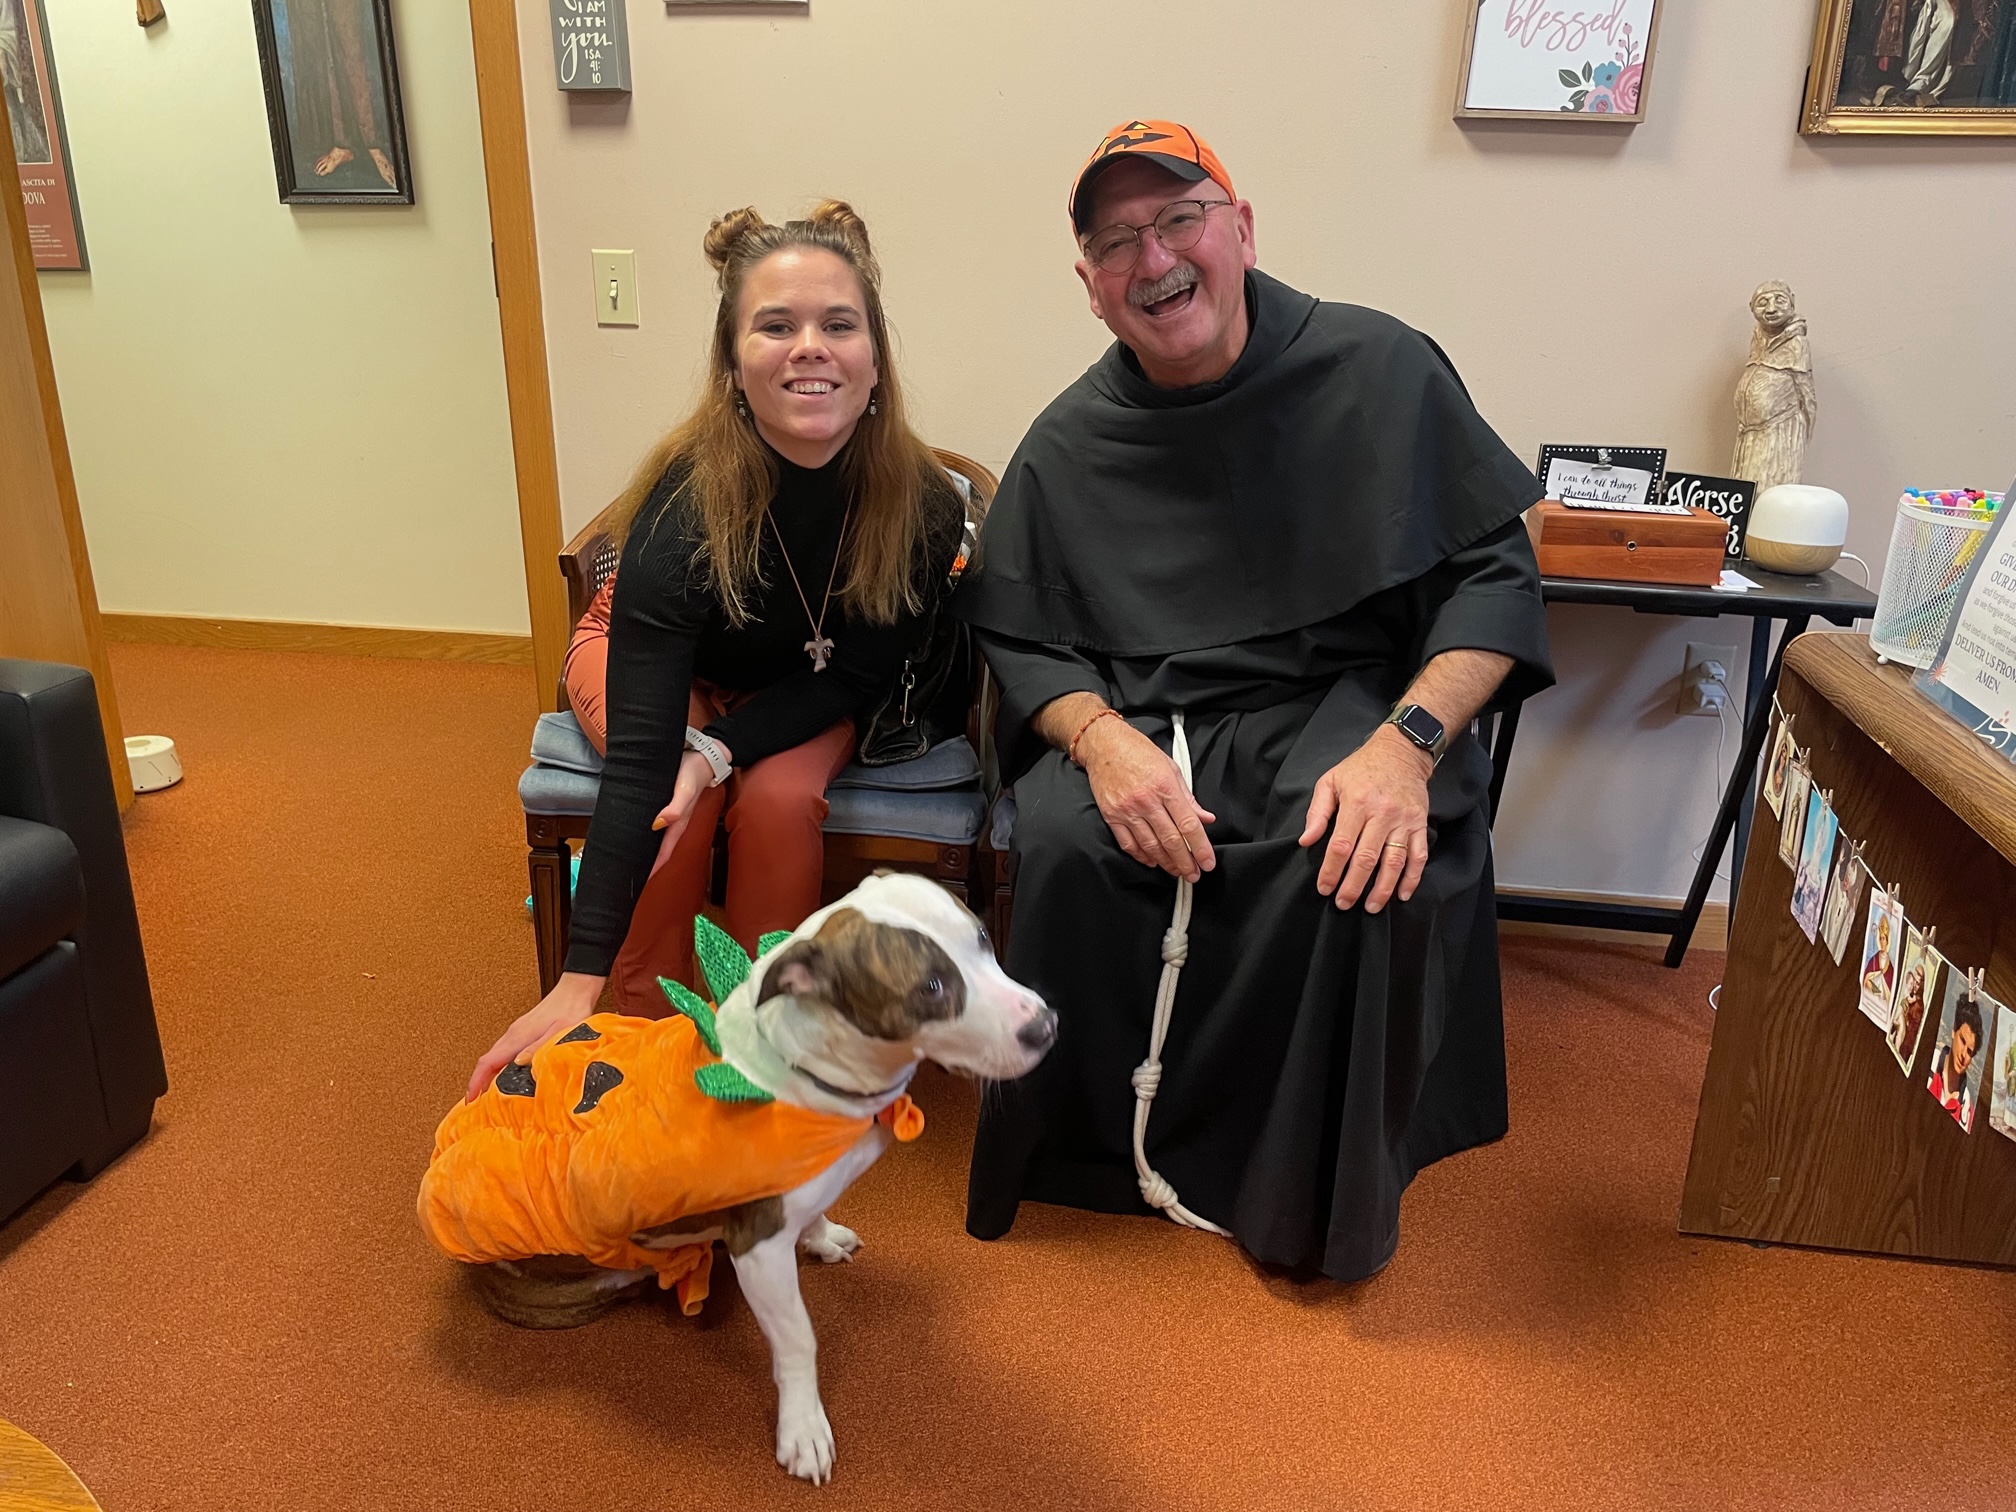 Two people sitting in chairs with a dog in a Halloween costume.